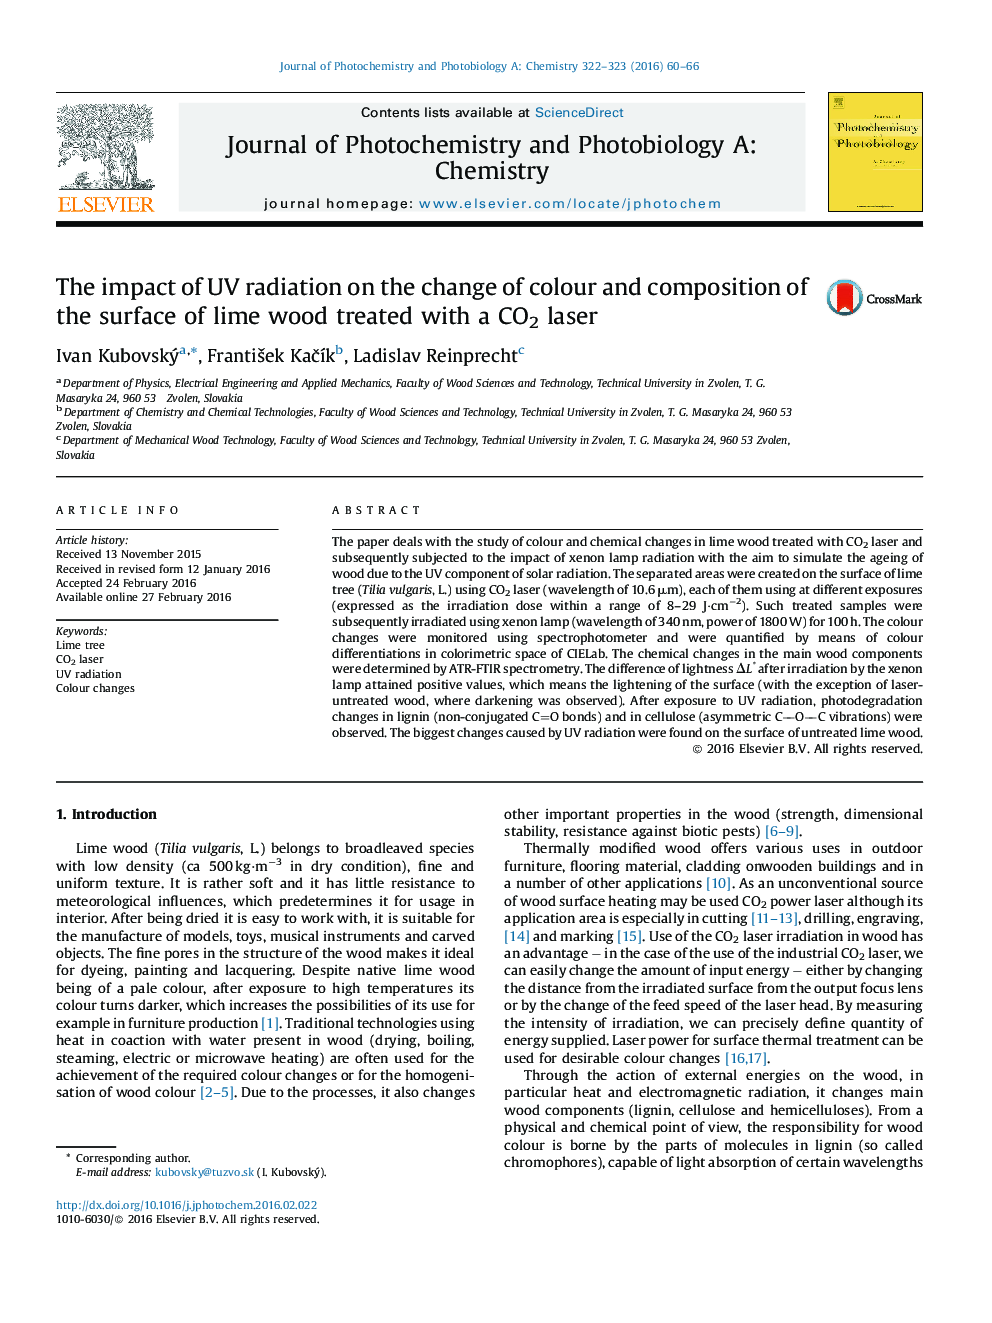 The impact of UV radiation on the change of colour and composition of the surface of lime wood treated with a CO2 laser